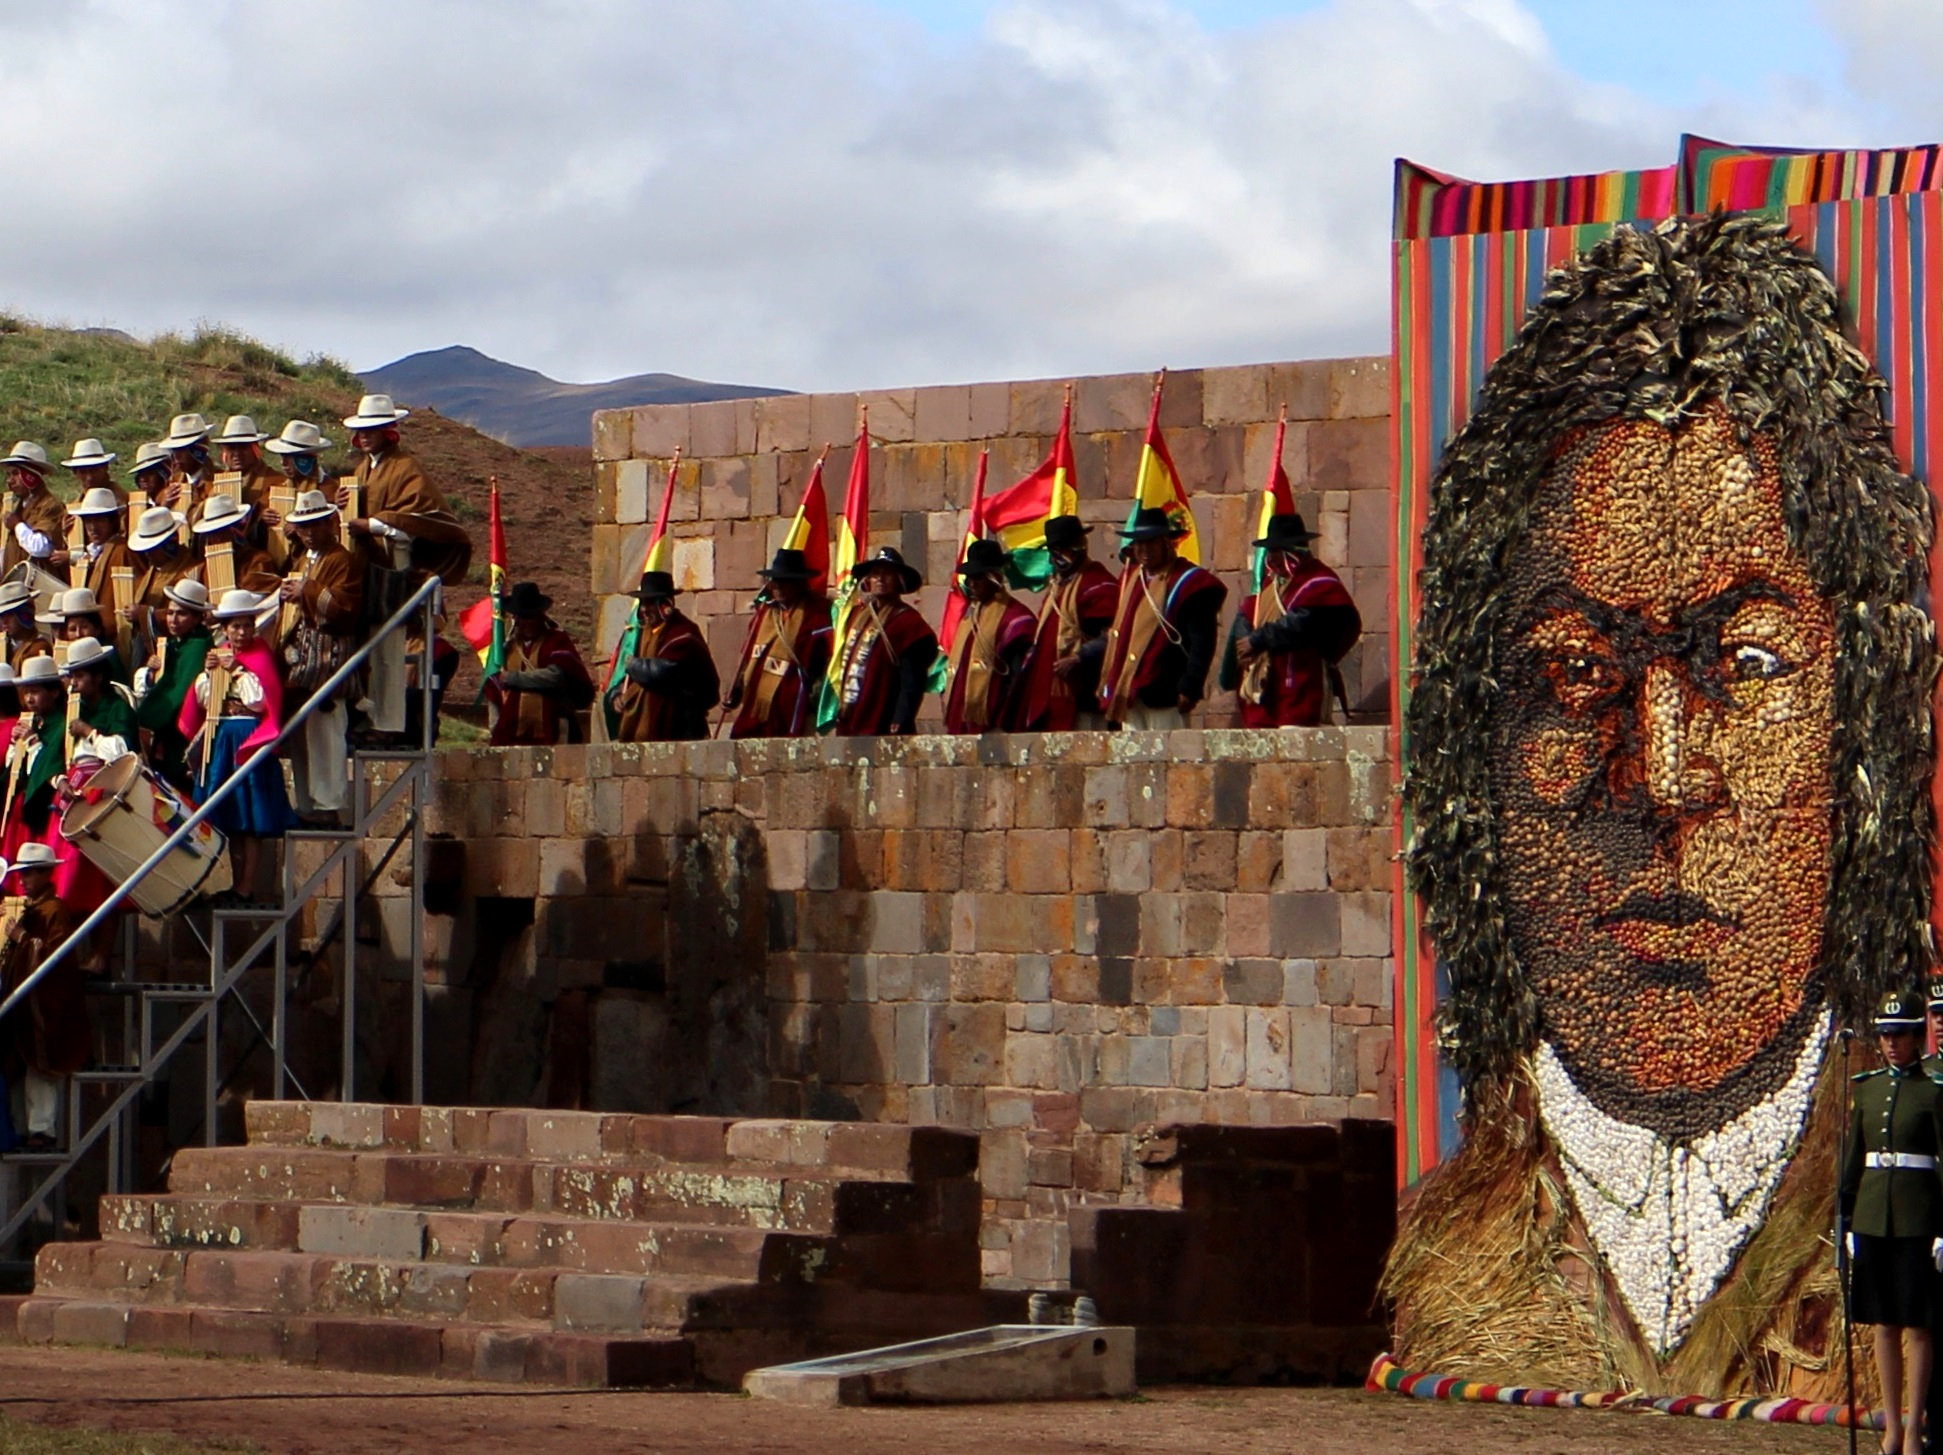 History At The Barricades Evo Morales And Power Of Past